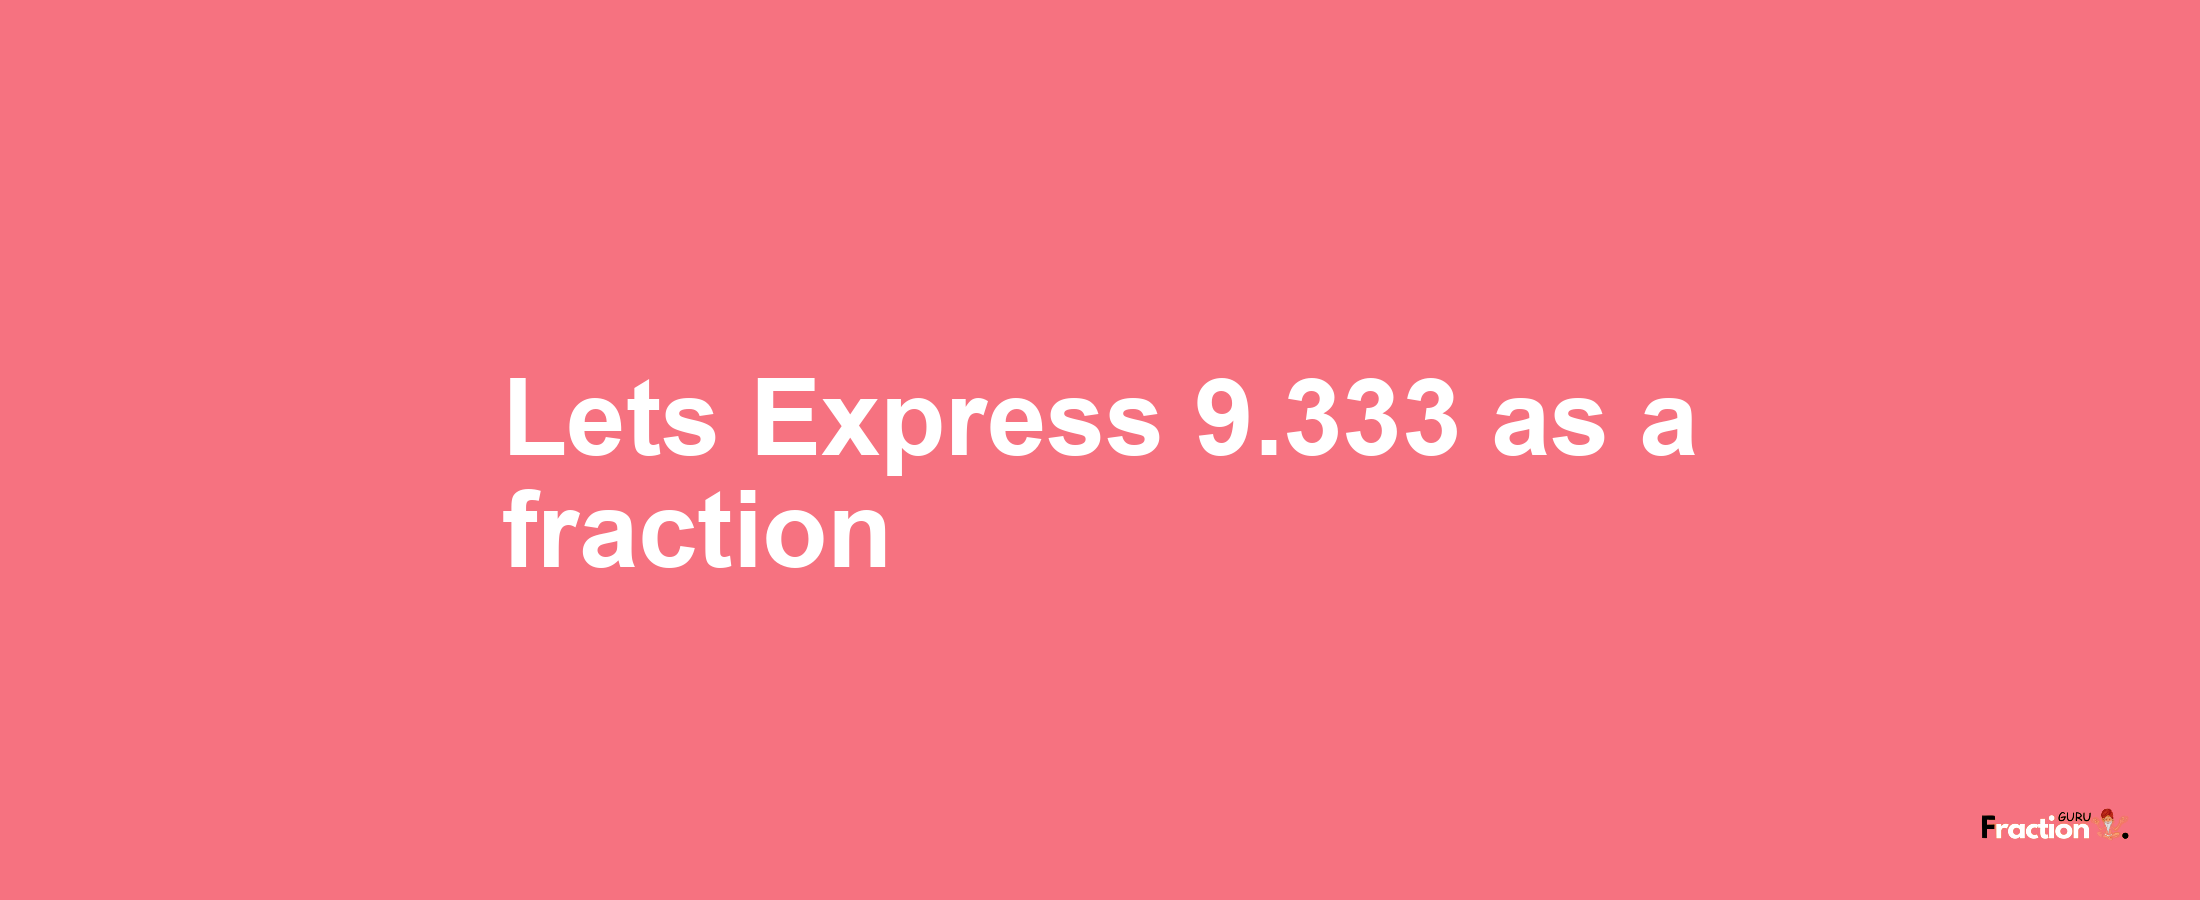 Lets Express 9.333 as afraction